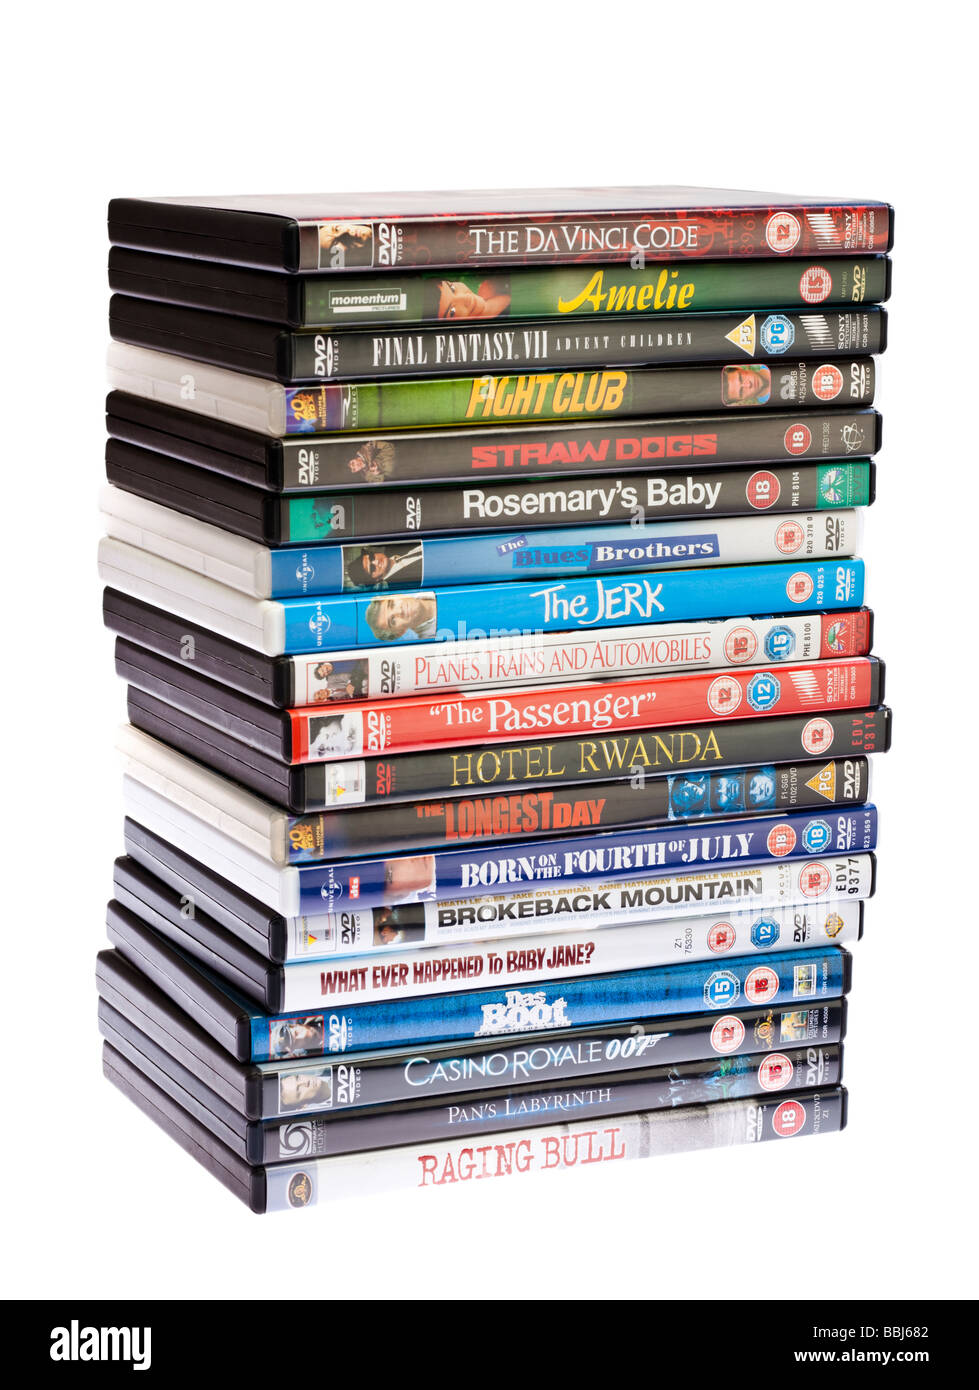 clipart collection on dvd - photo #27